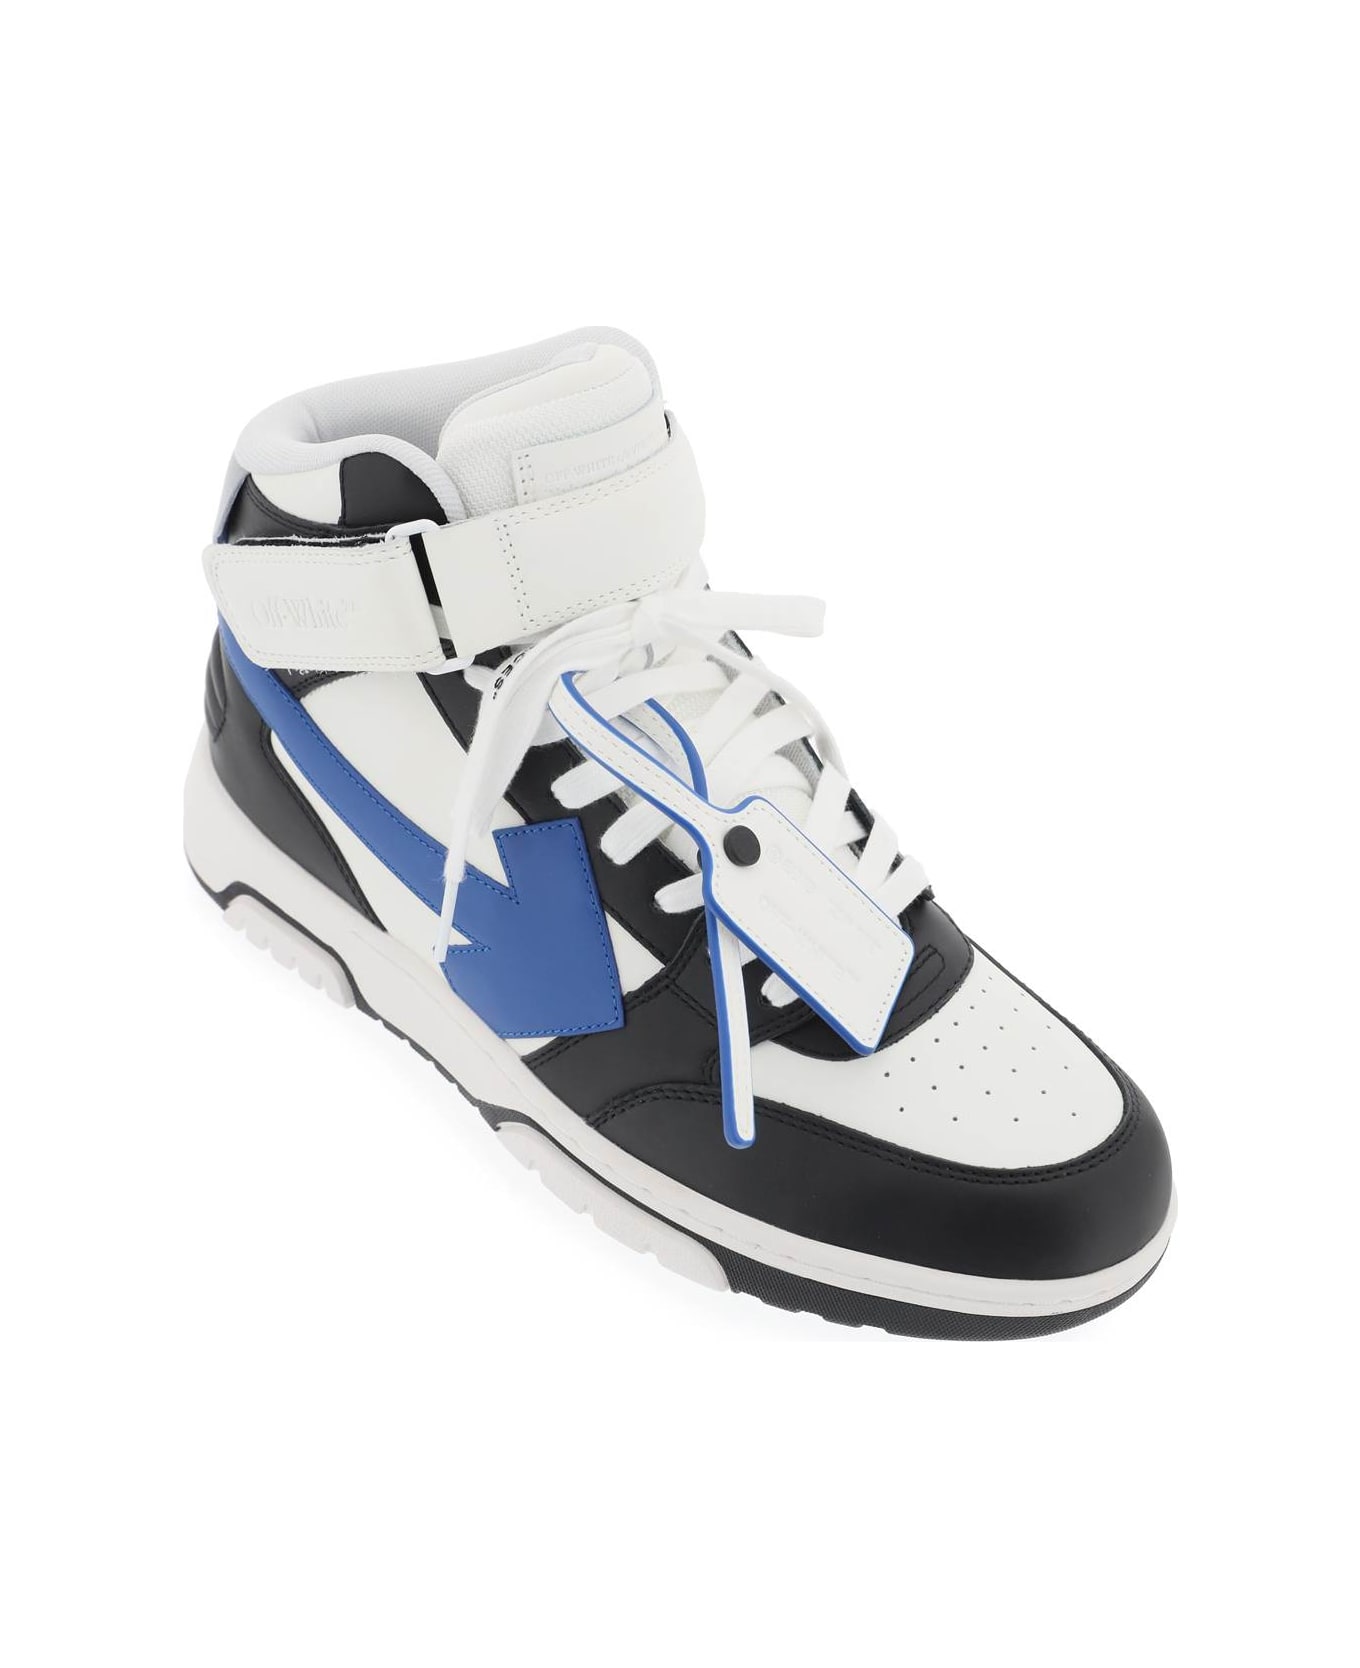 Off-White Out Of Office Sneakers - BLACK NAVY BLU (White) スニーカー